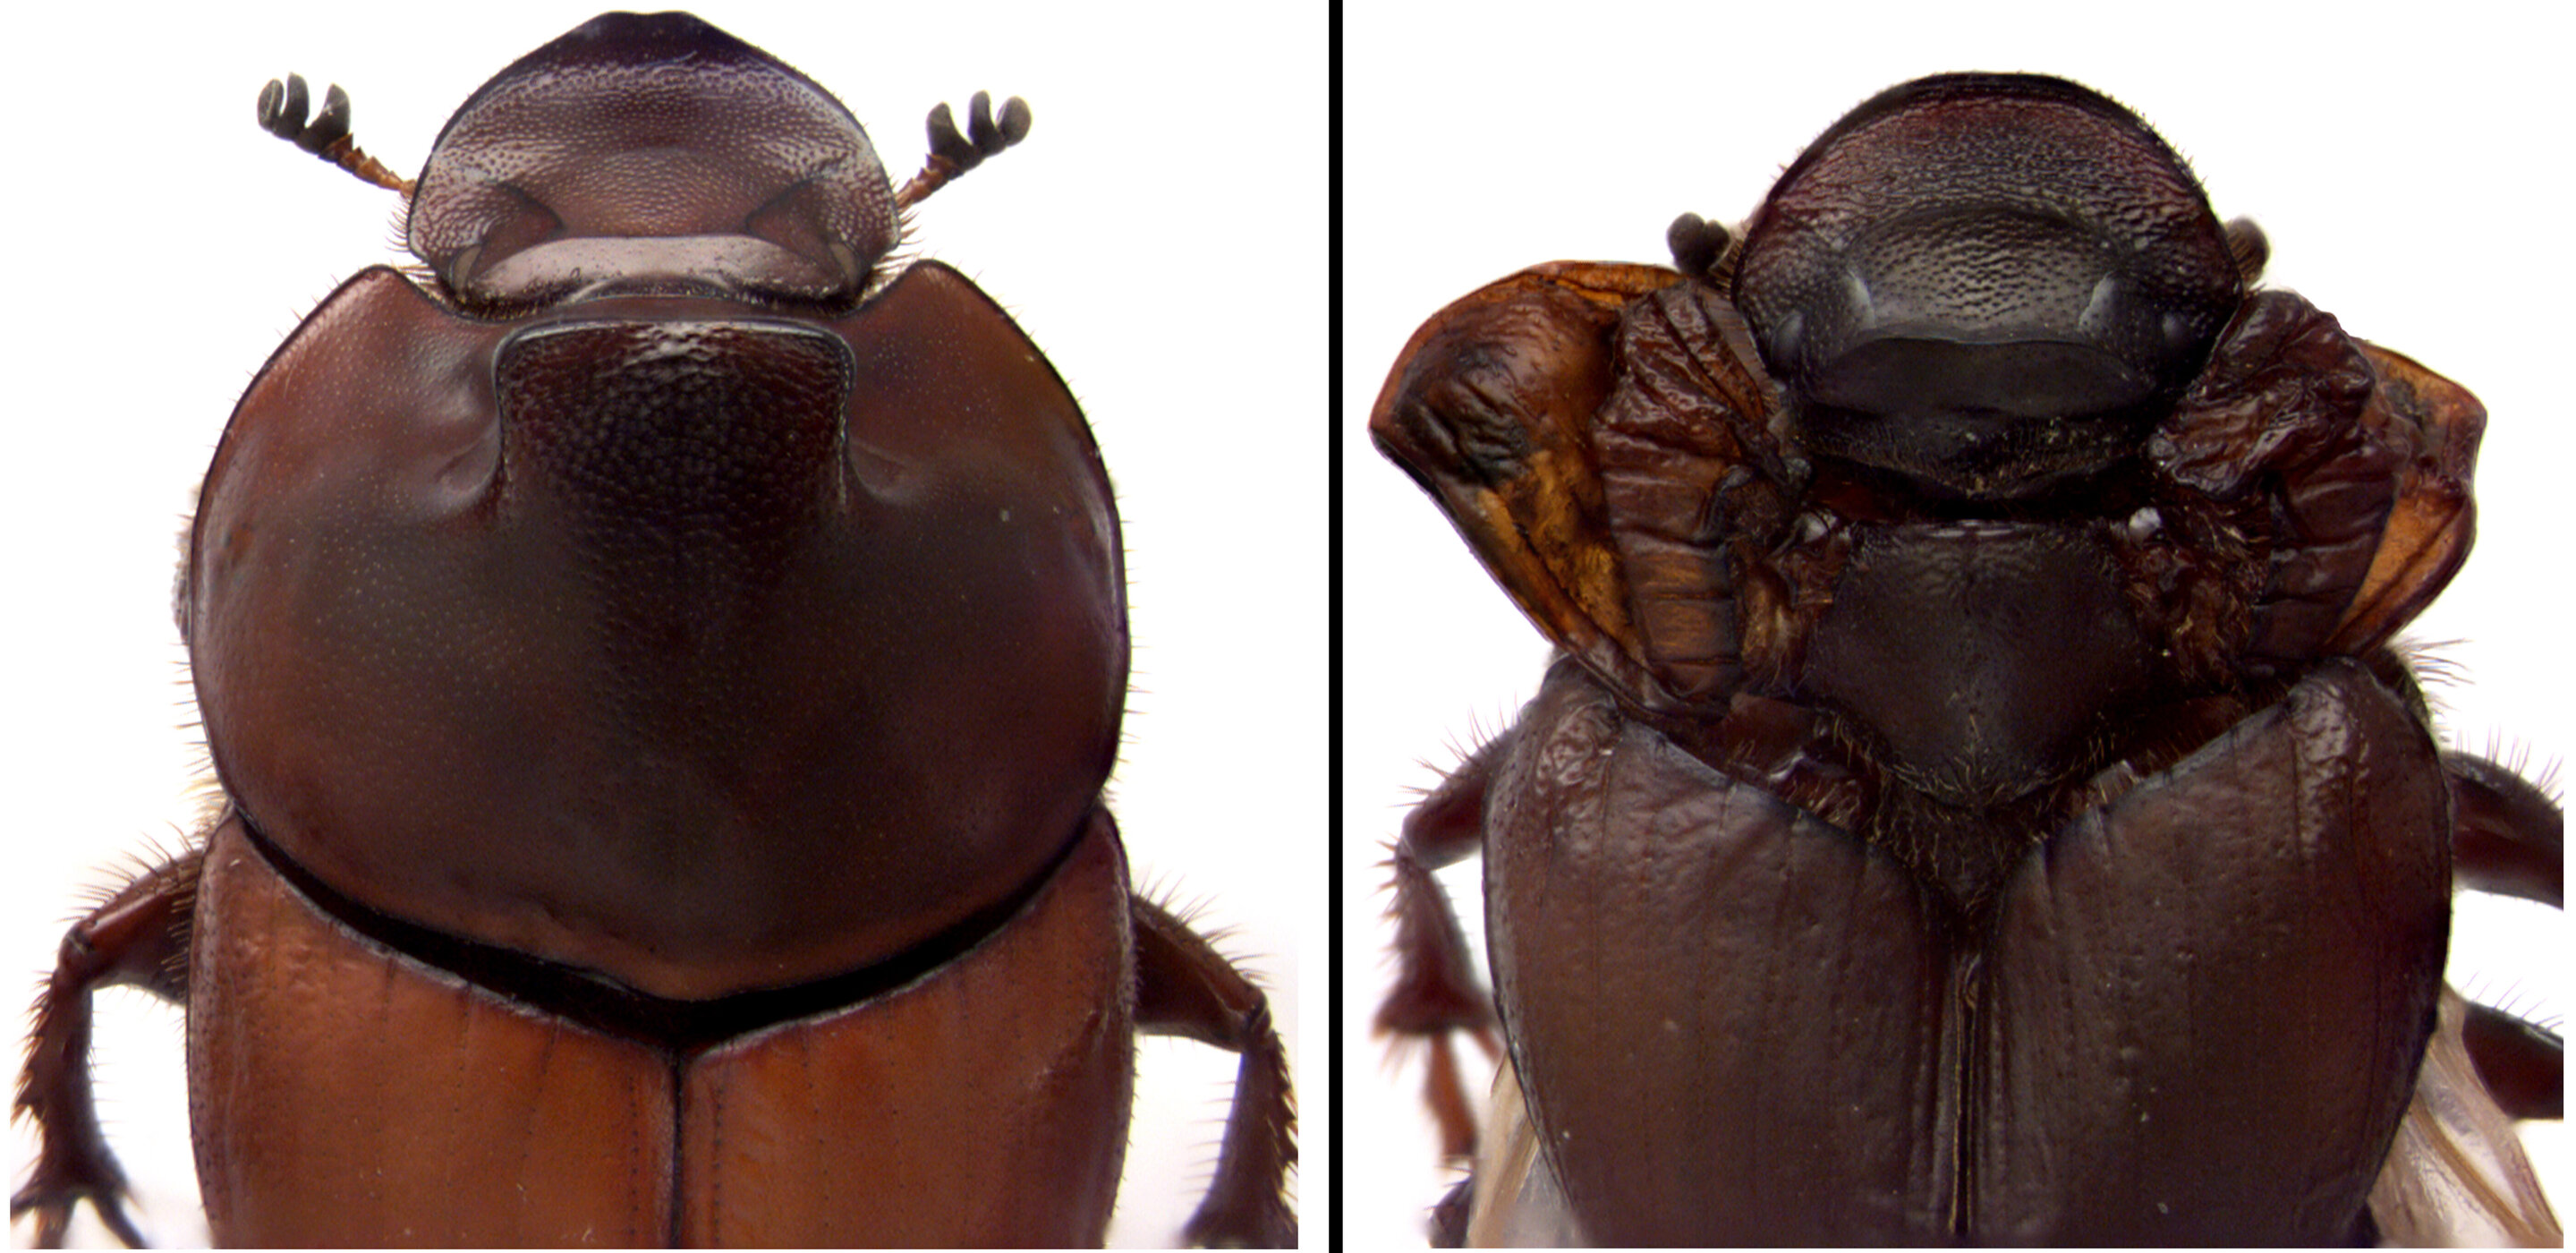 photo of Dung beetle discovery revises biologists' understanding of how nature innovates image